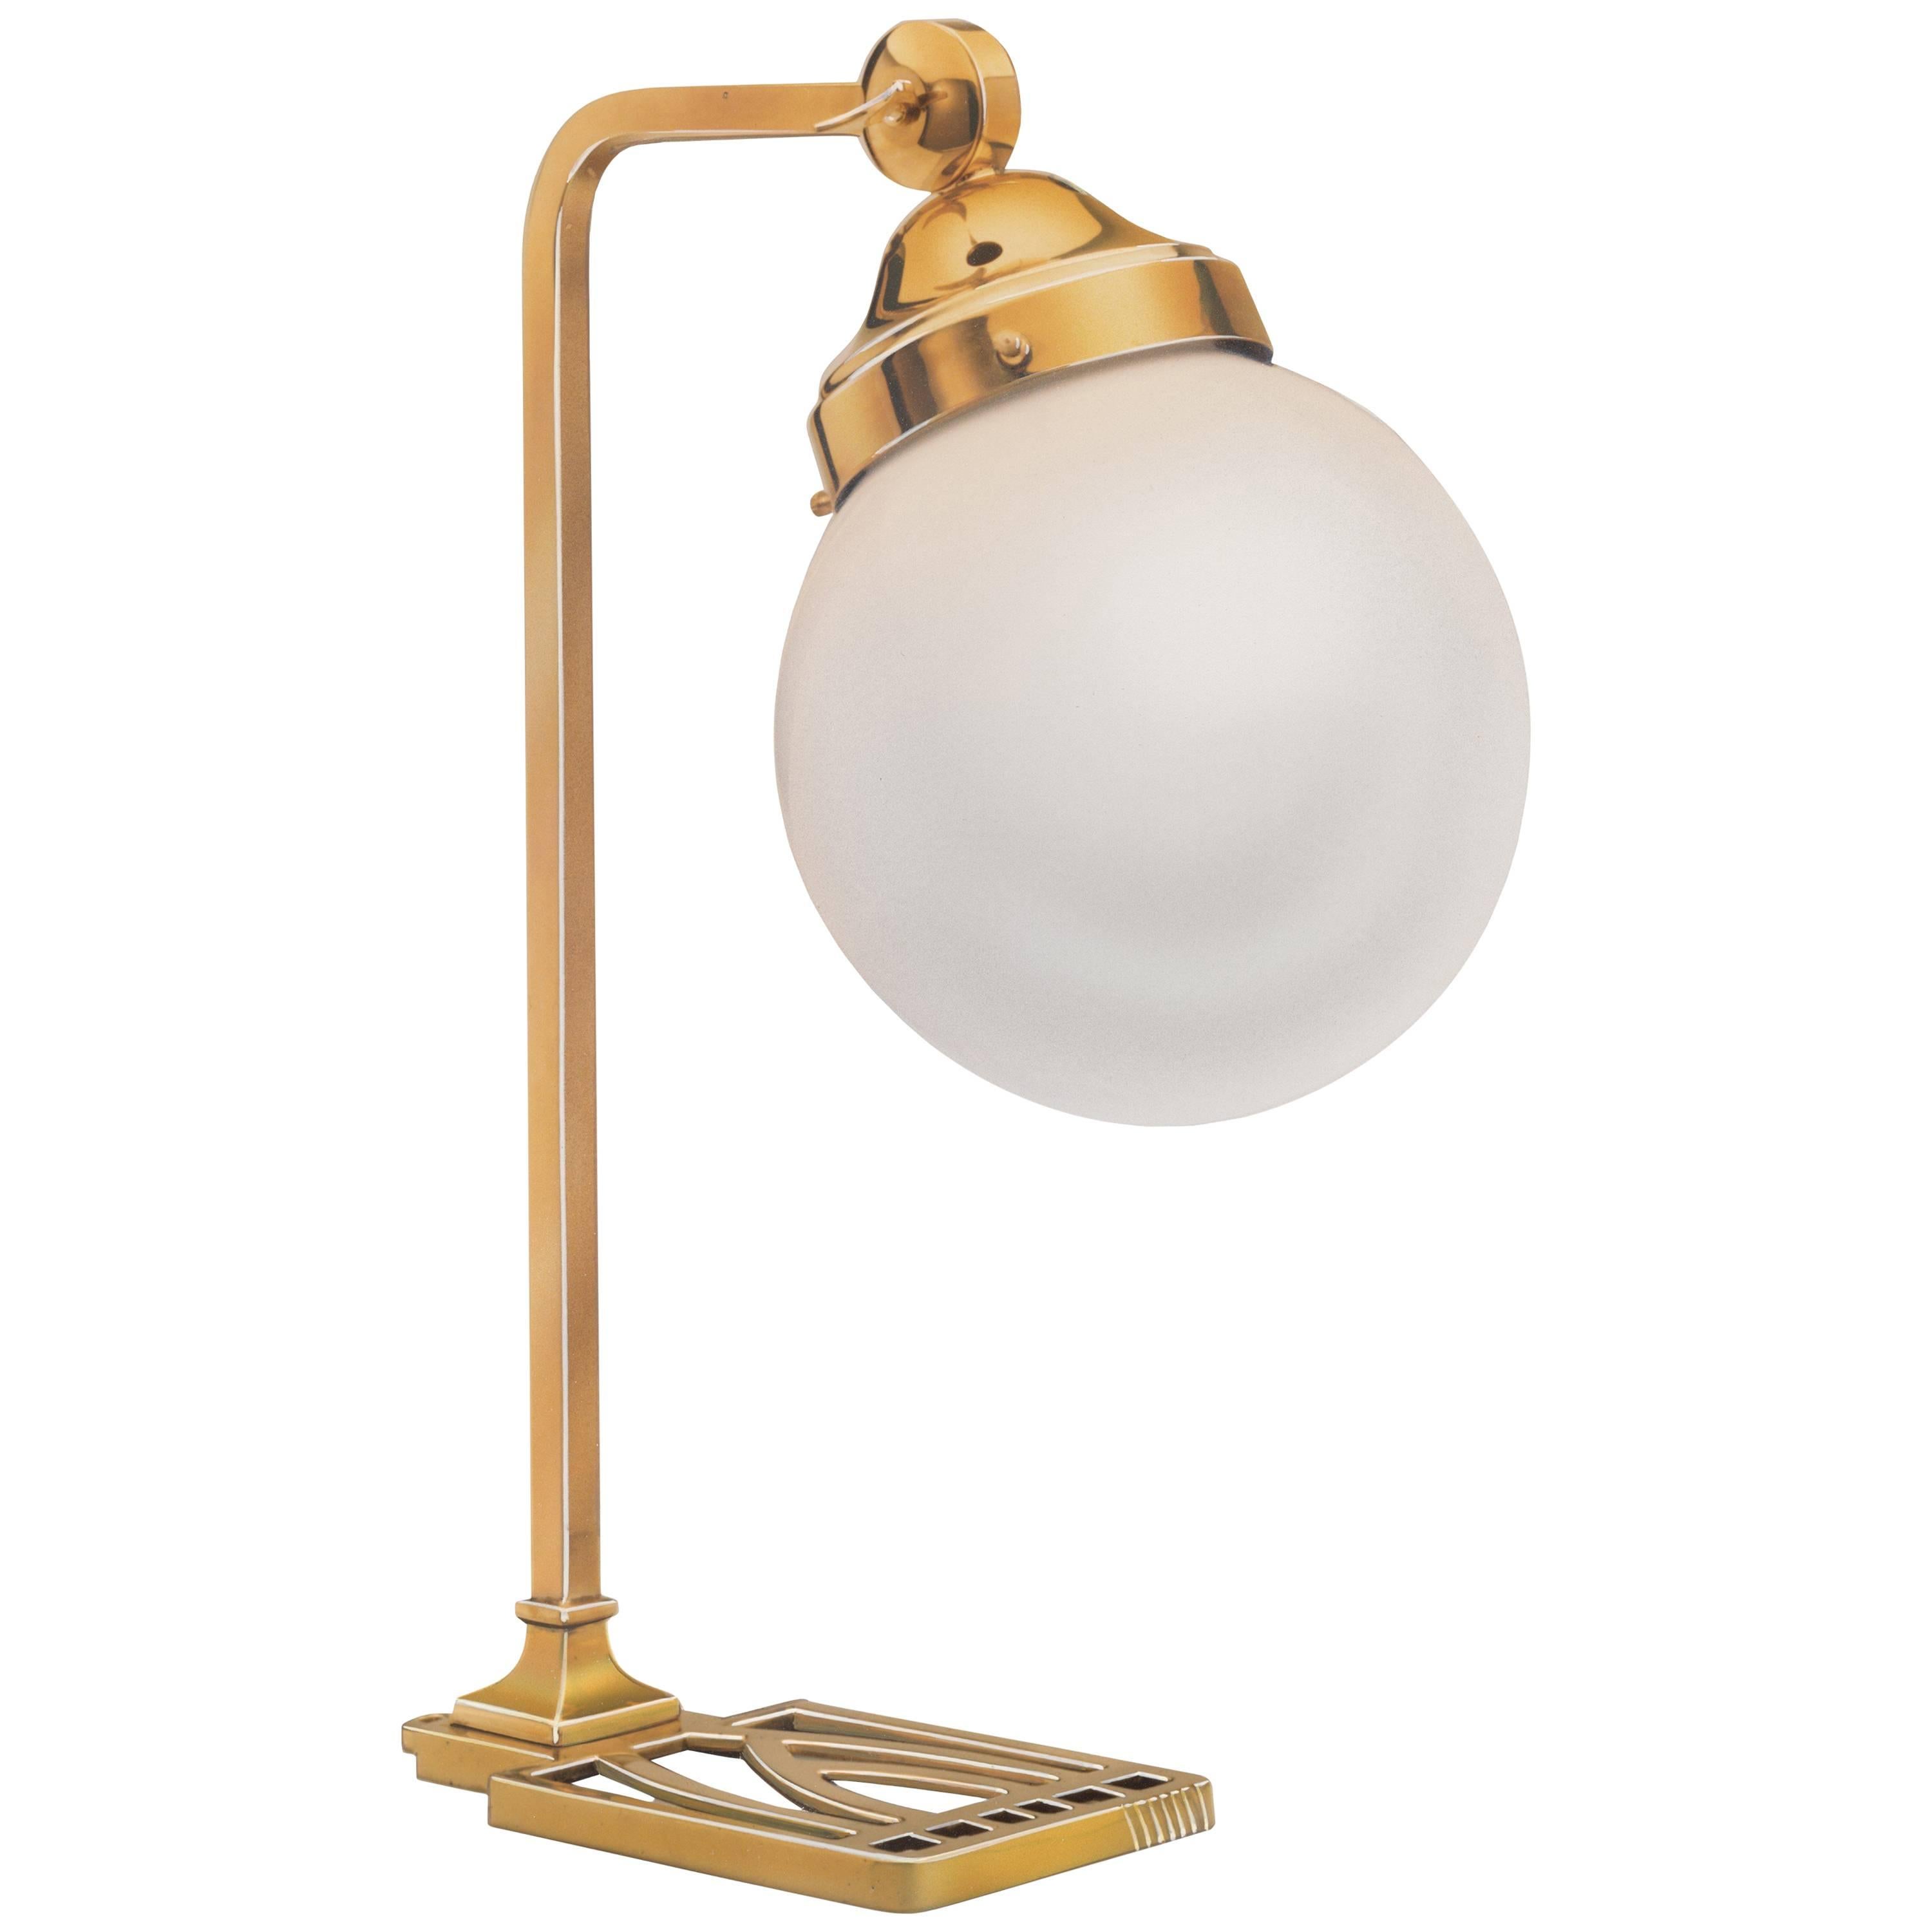 Koloman 'Kolo' Moser Table or Wall Lamp in One, Re-Edition For Sale